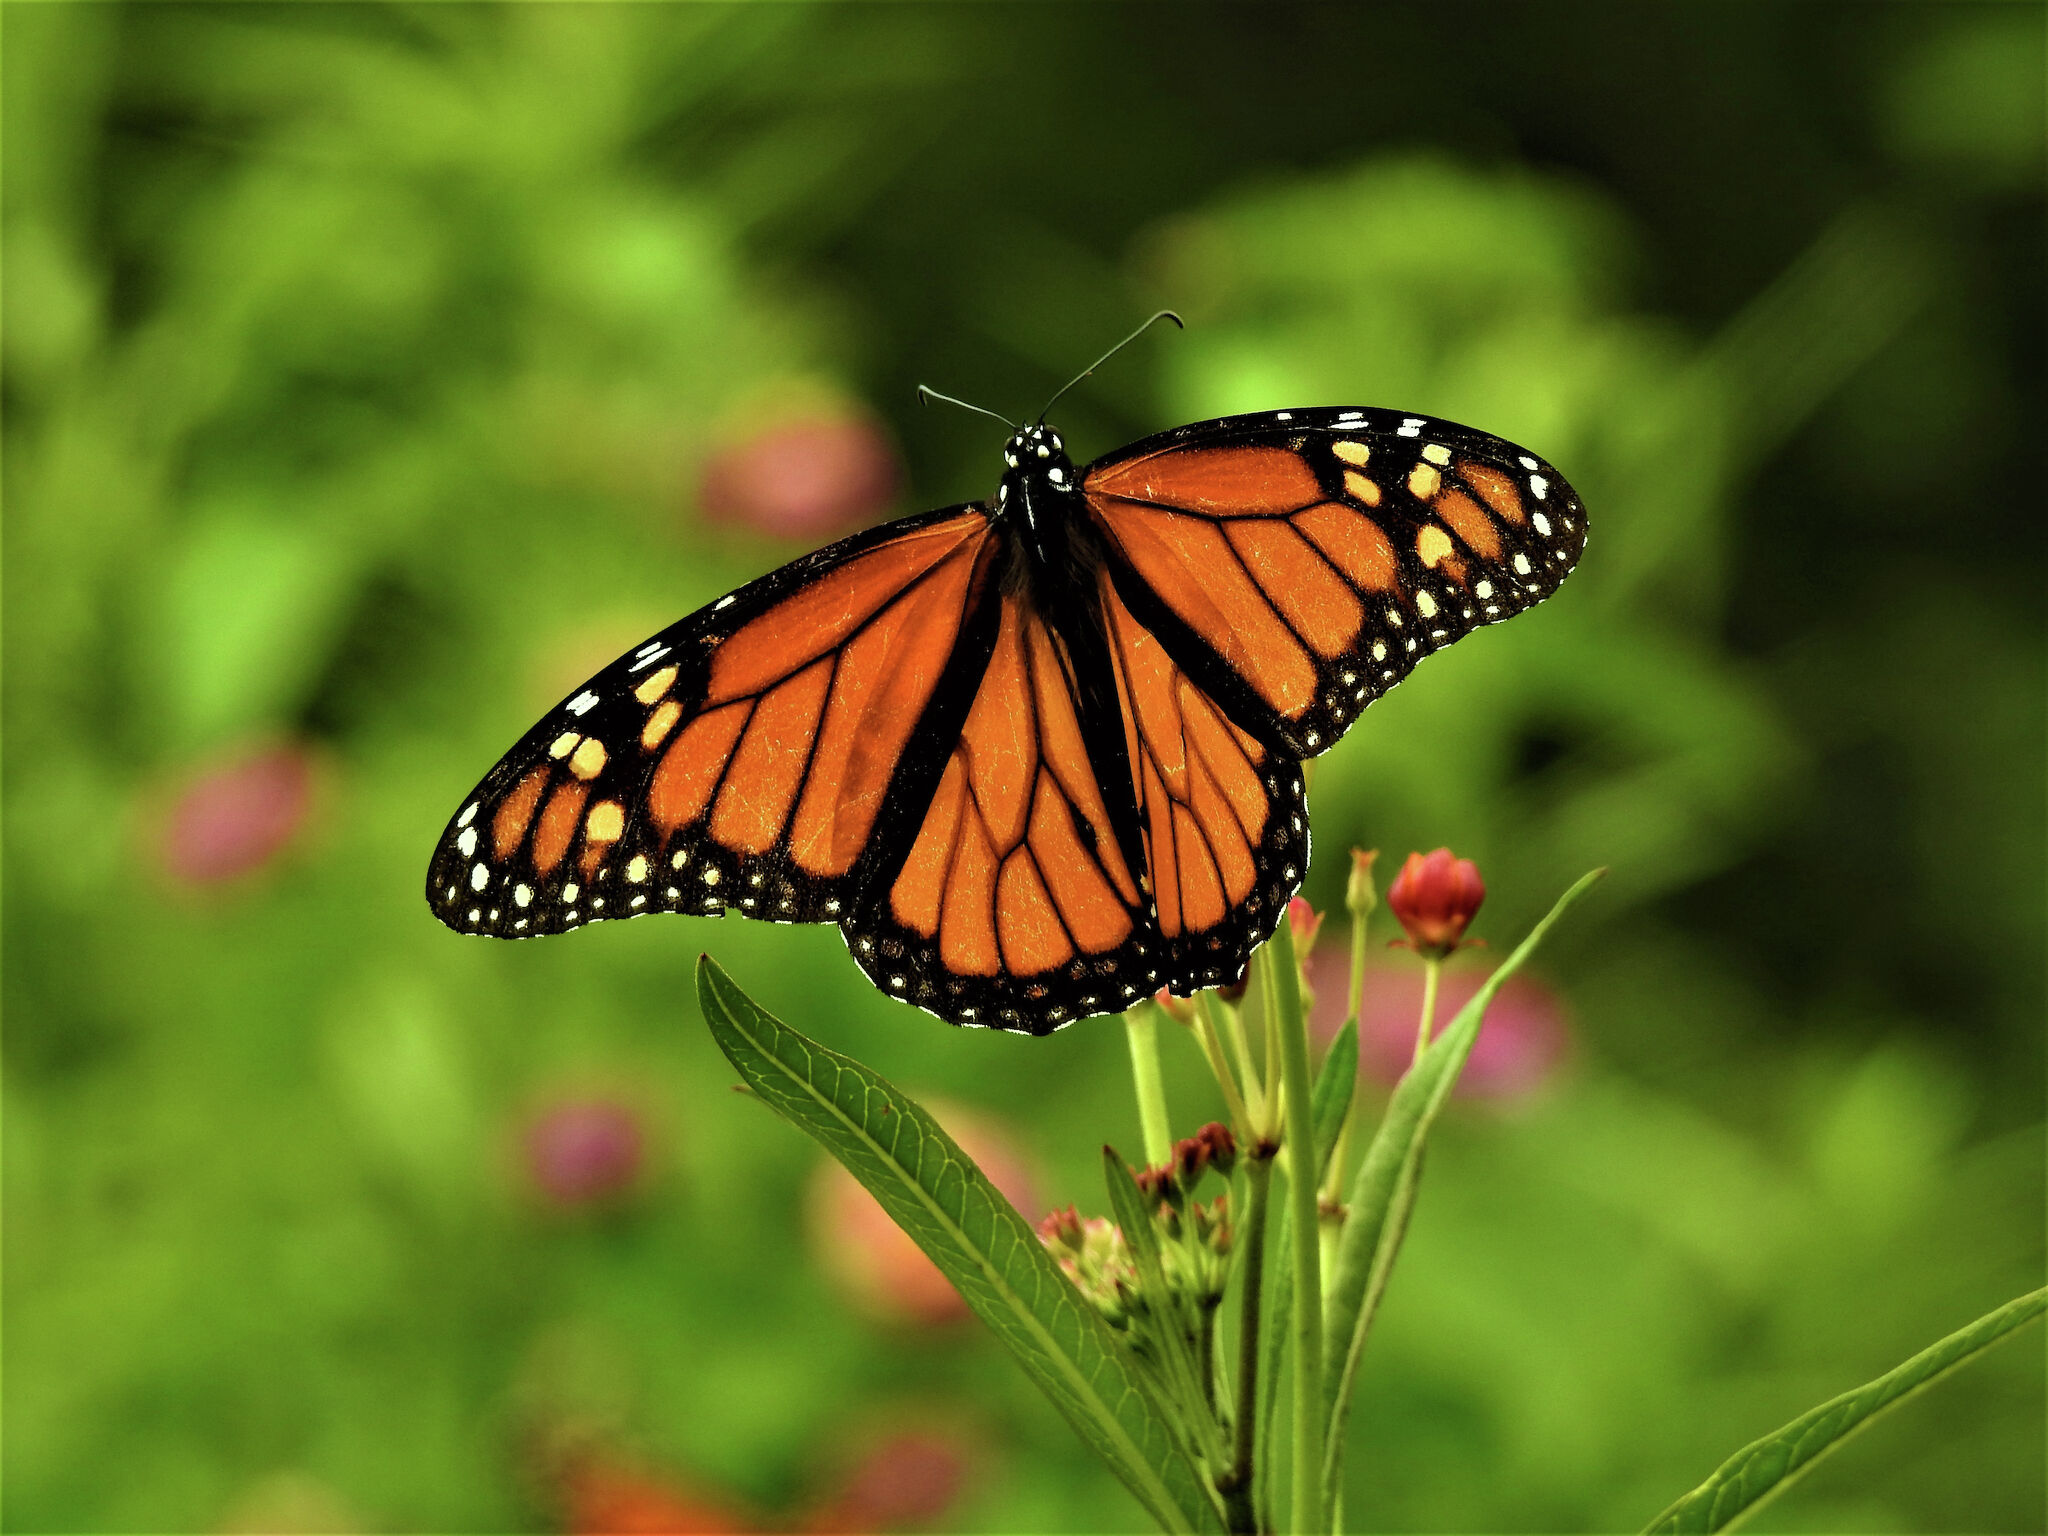 Migratory monarch butterfly now Endangered - IUCN Red List - Press